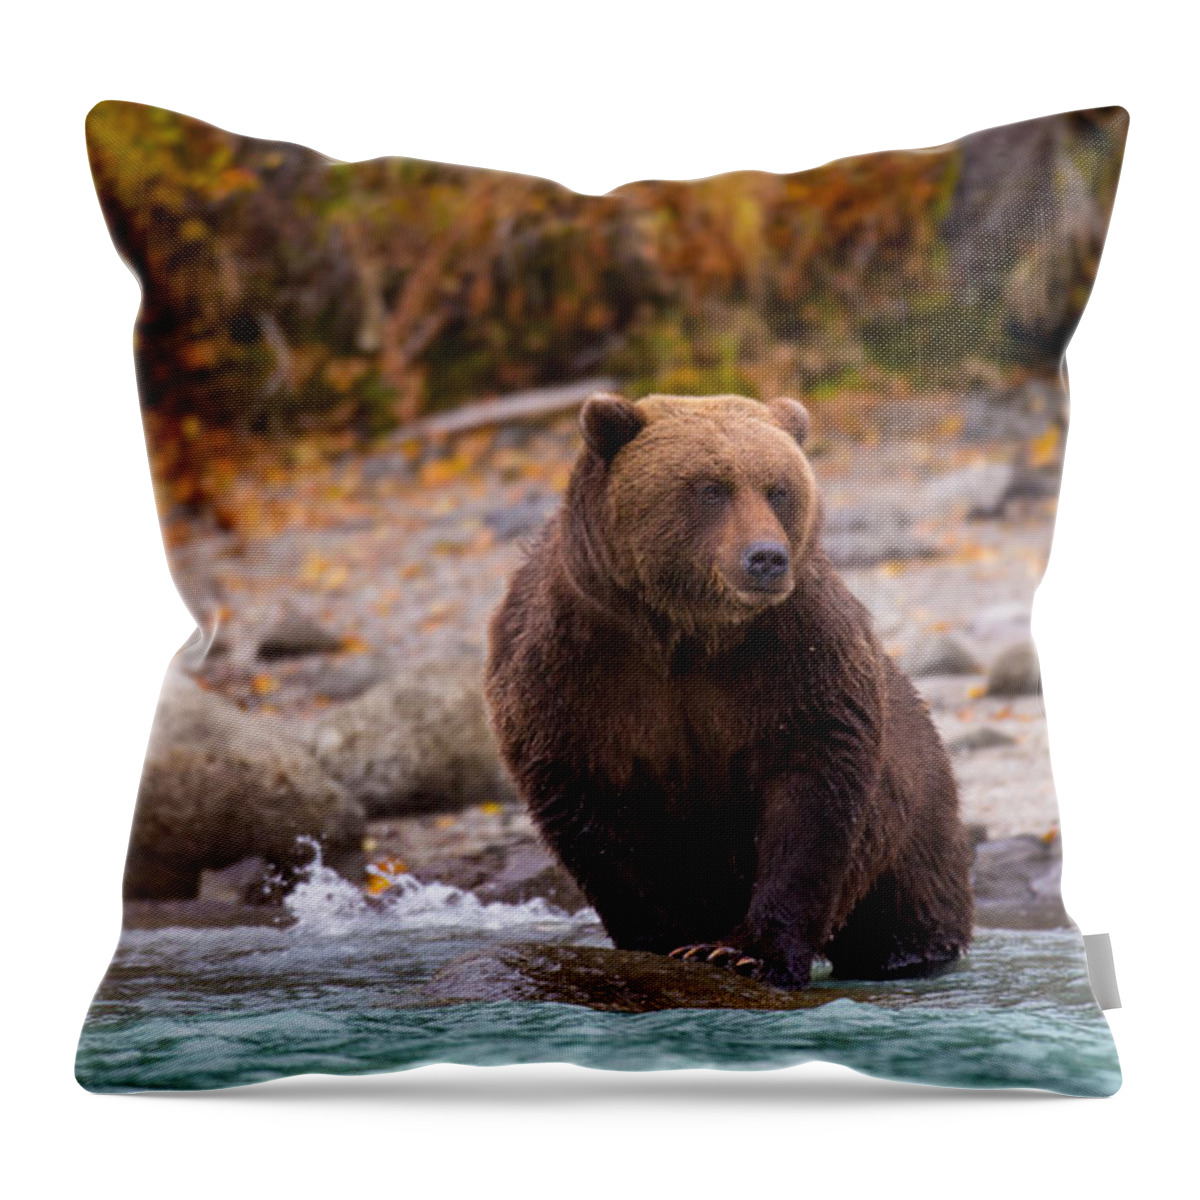 Bear Throw Pillow featuring the photograph Headed In by Kevin Dietrich